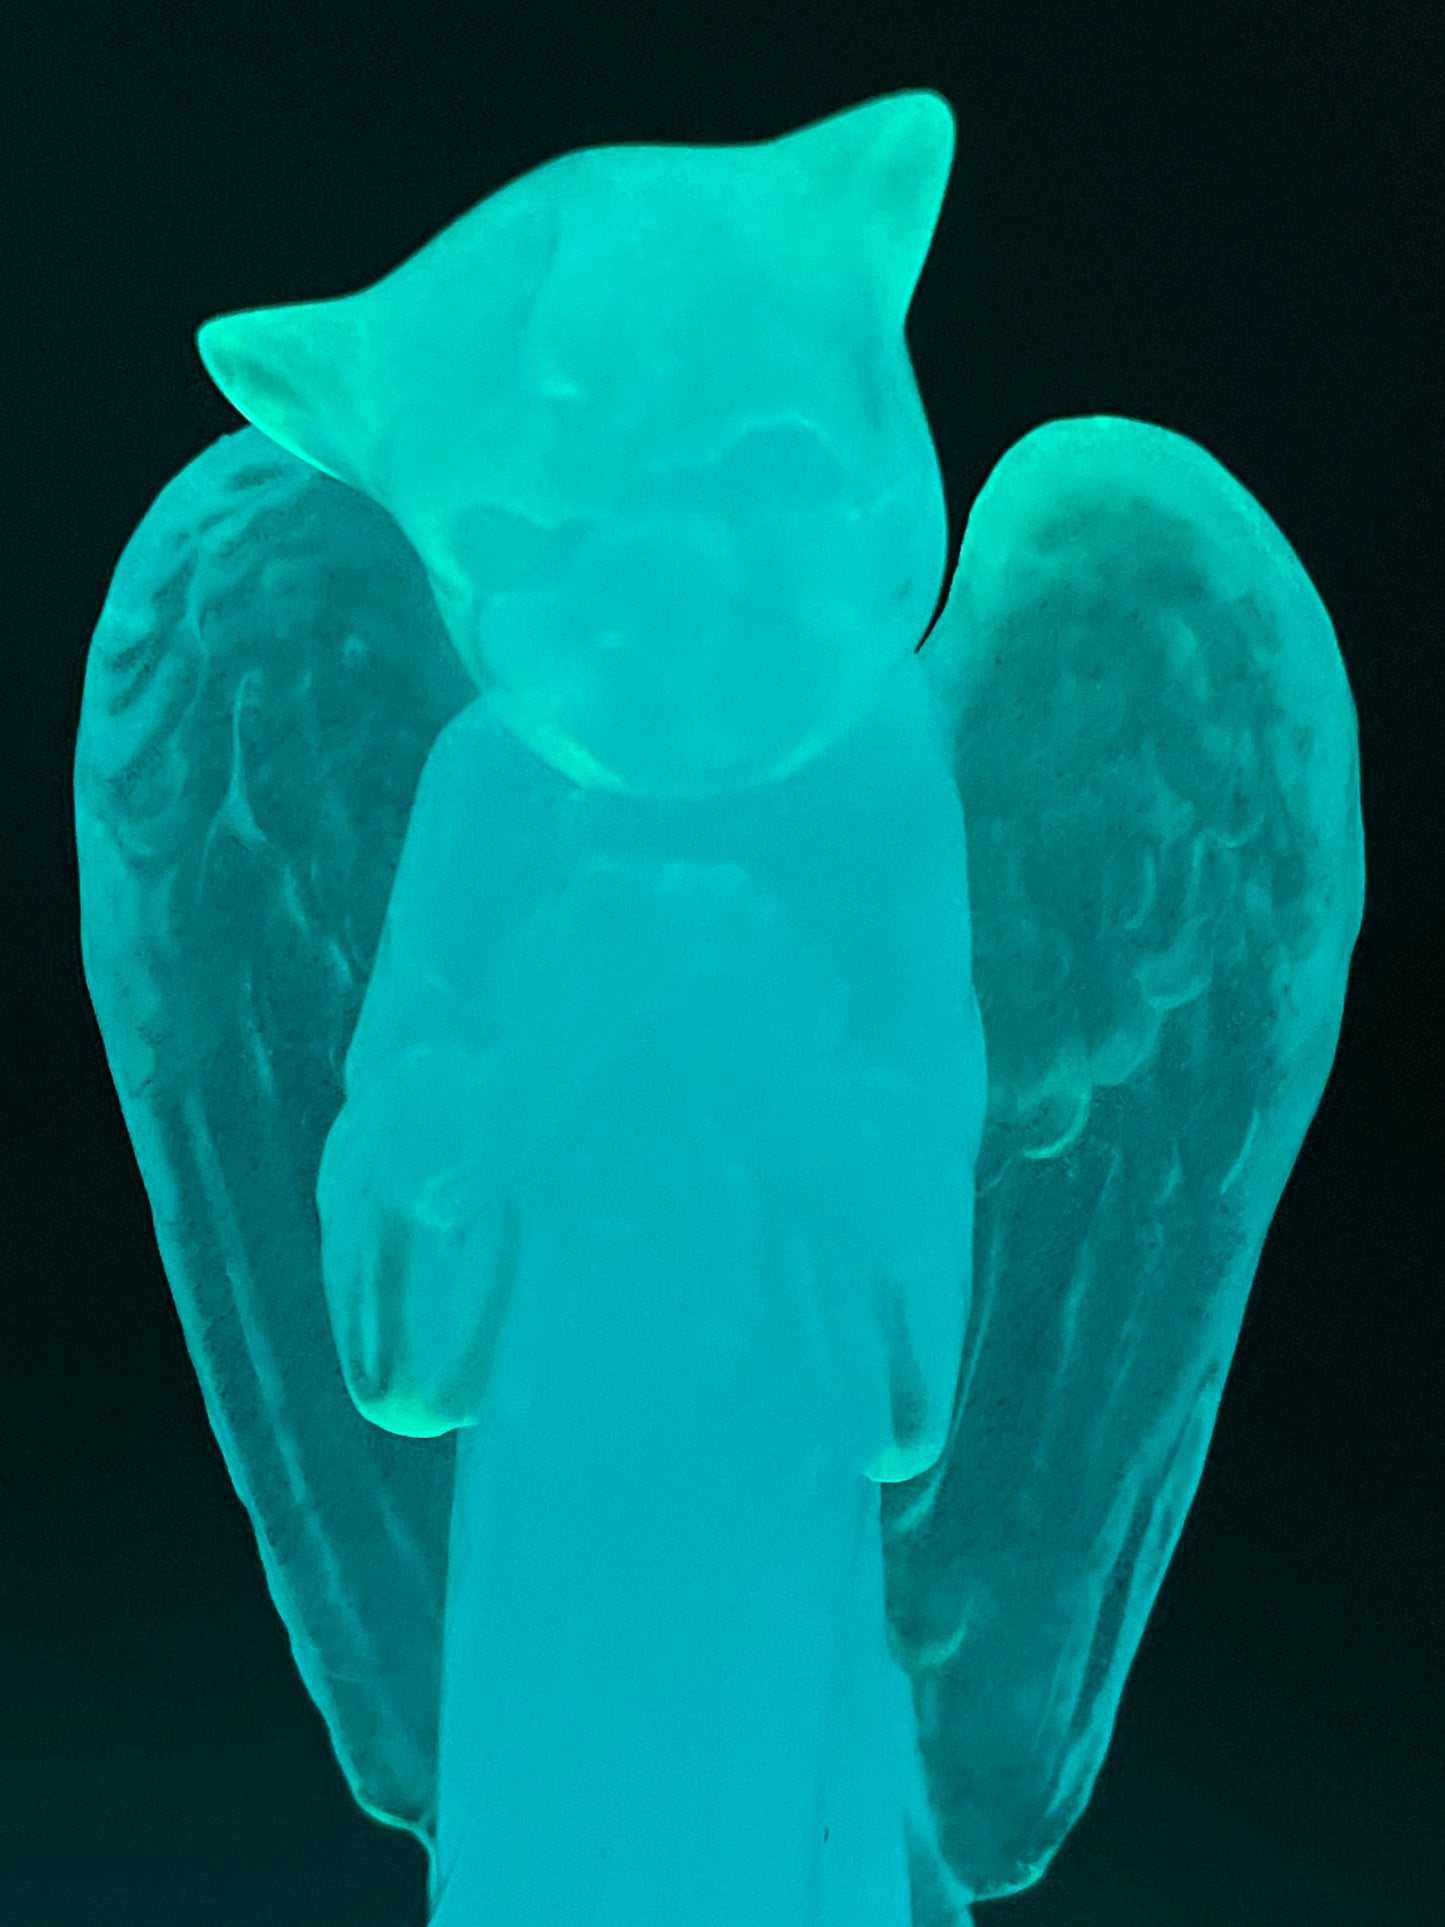 Angel Pig: Glowing for Purity/Redemption